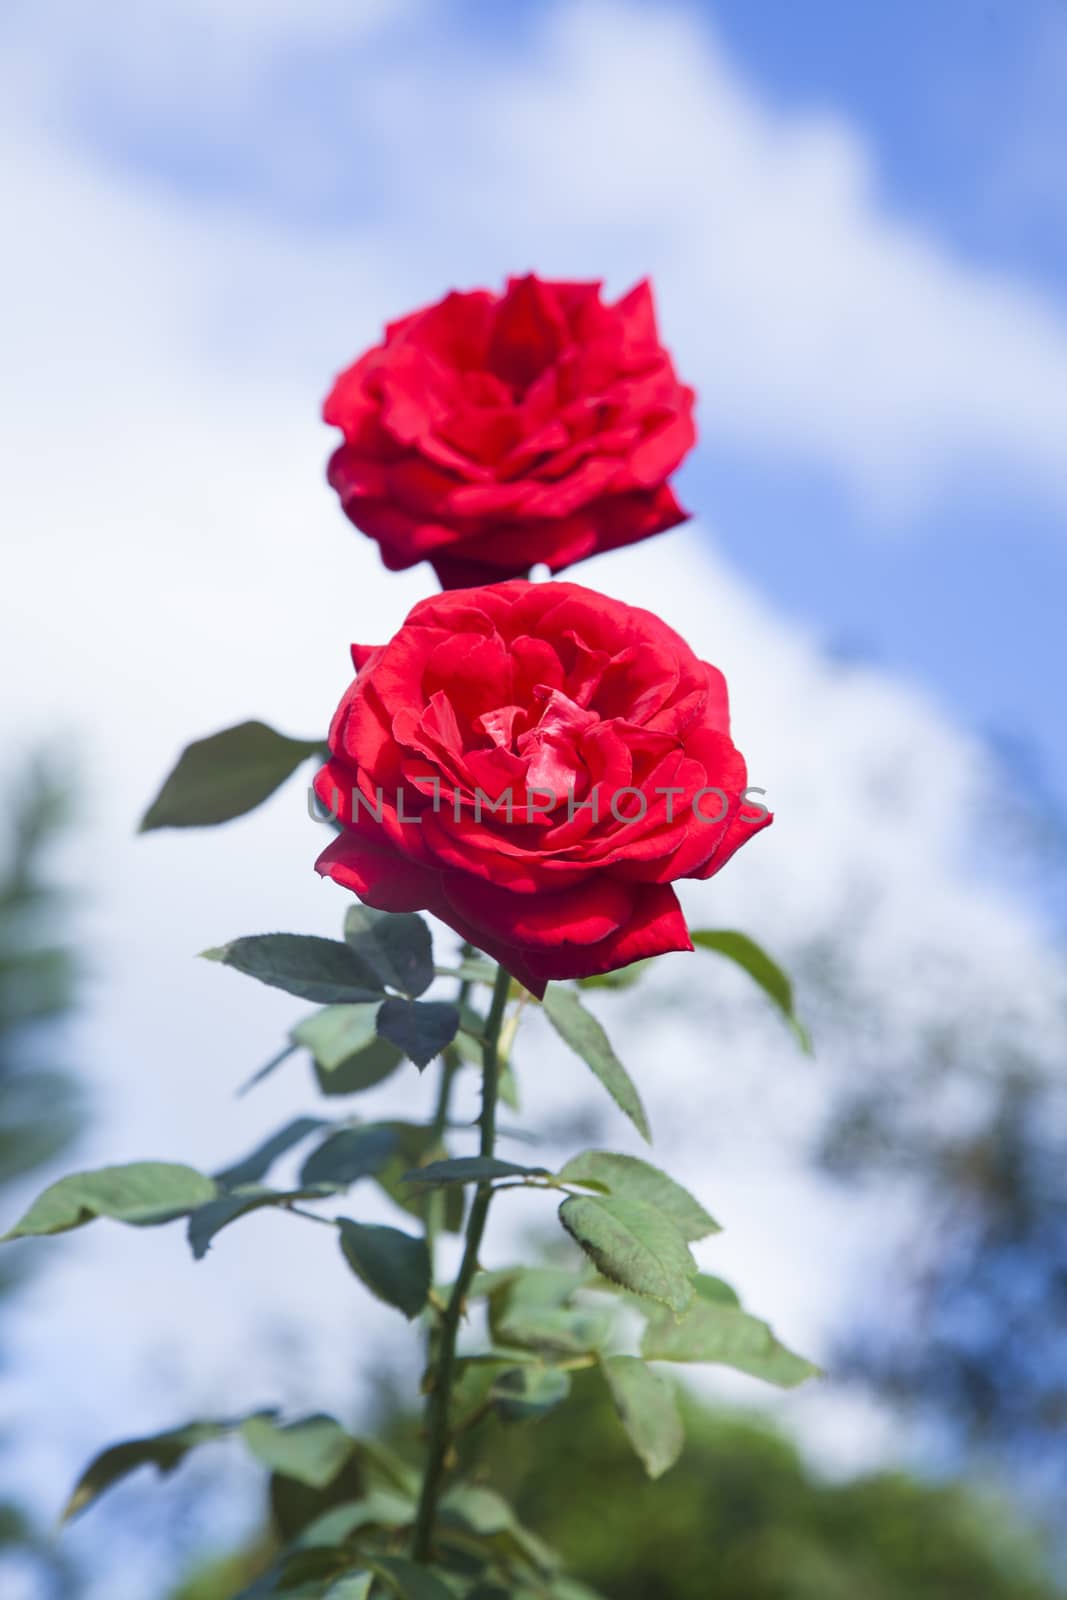 Red roses on blue sky background. Red climbing rose isolated on blue sky.